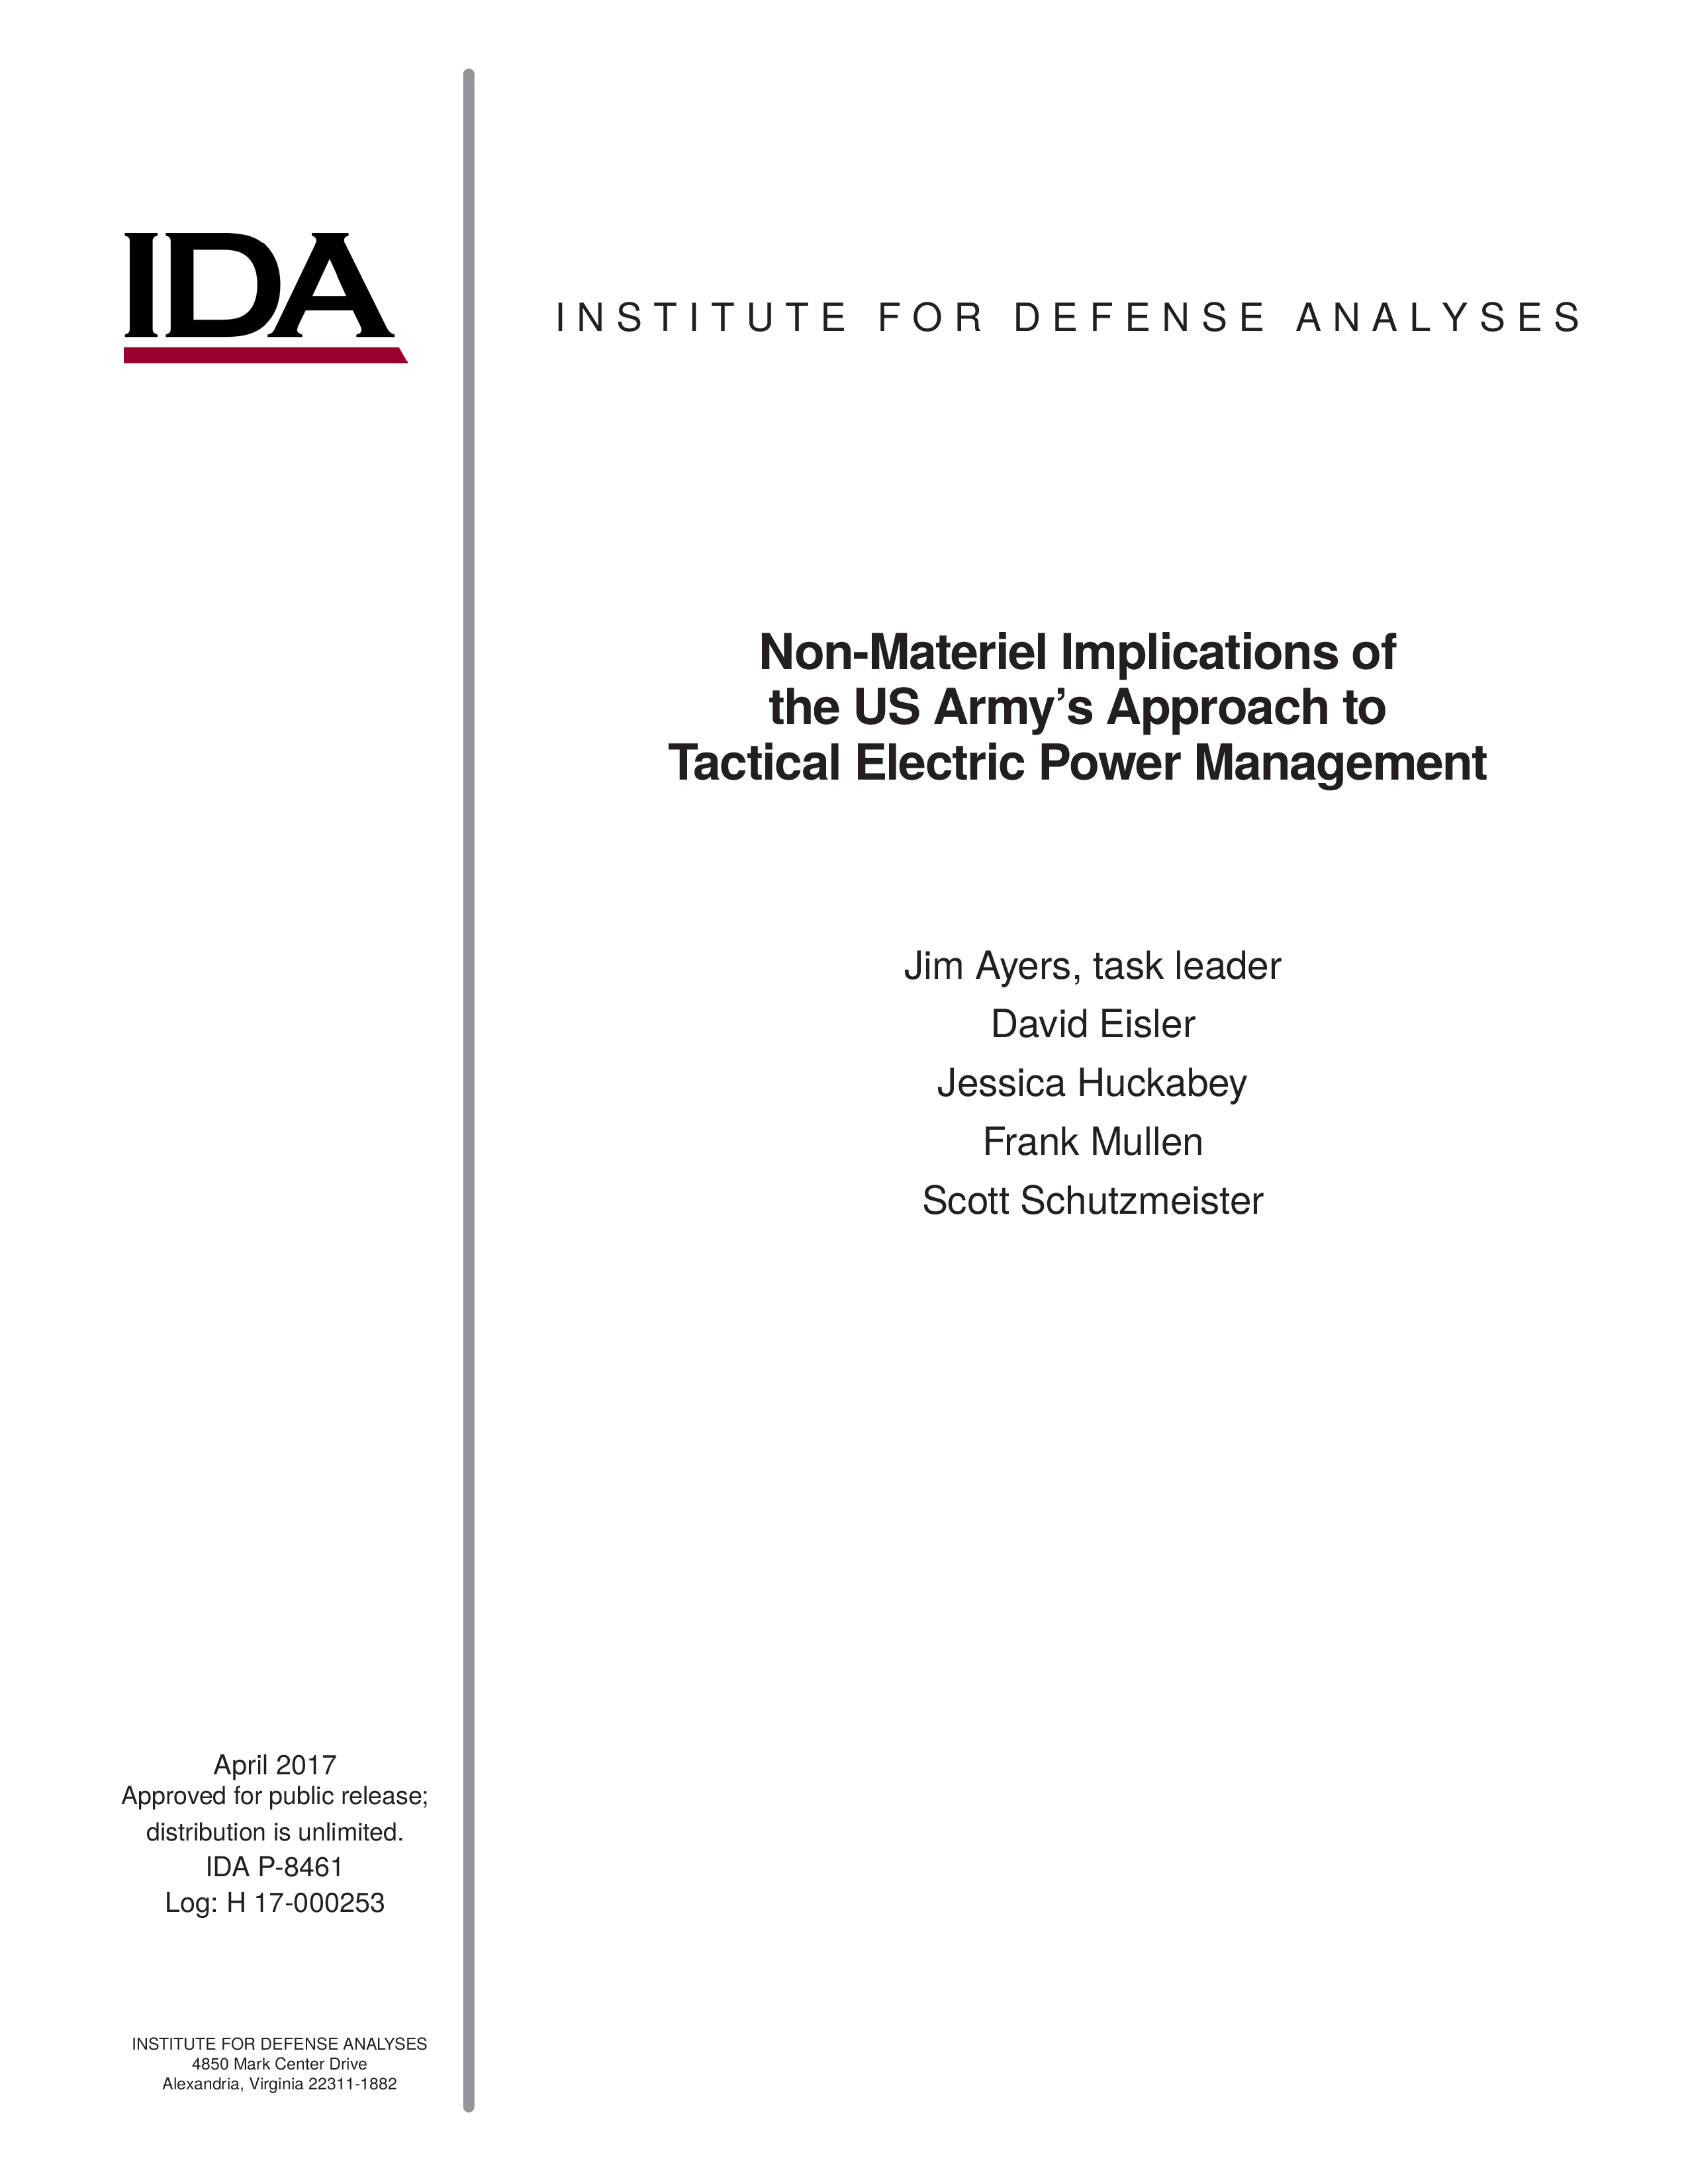 Non-Materiel Implications of the US Army’s Approach to Tactical Electric Power Management